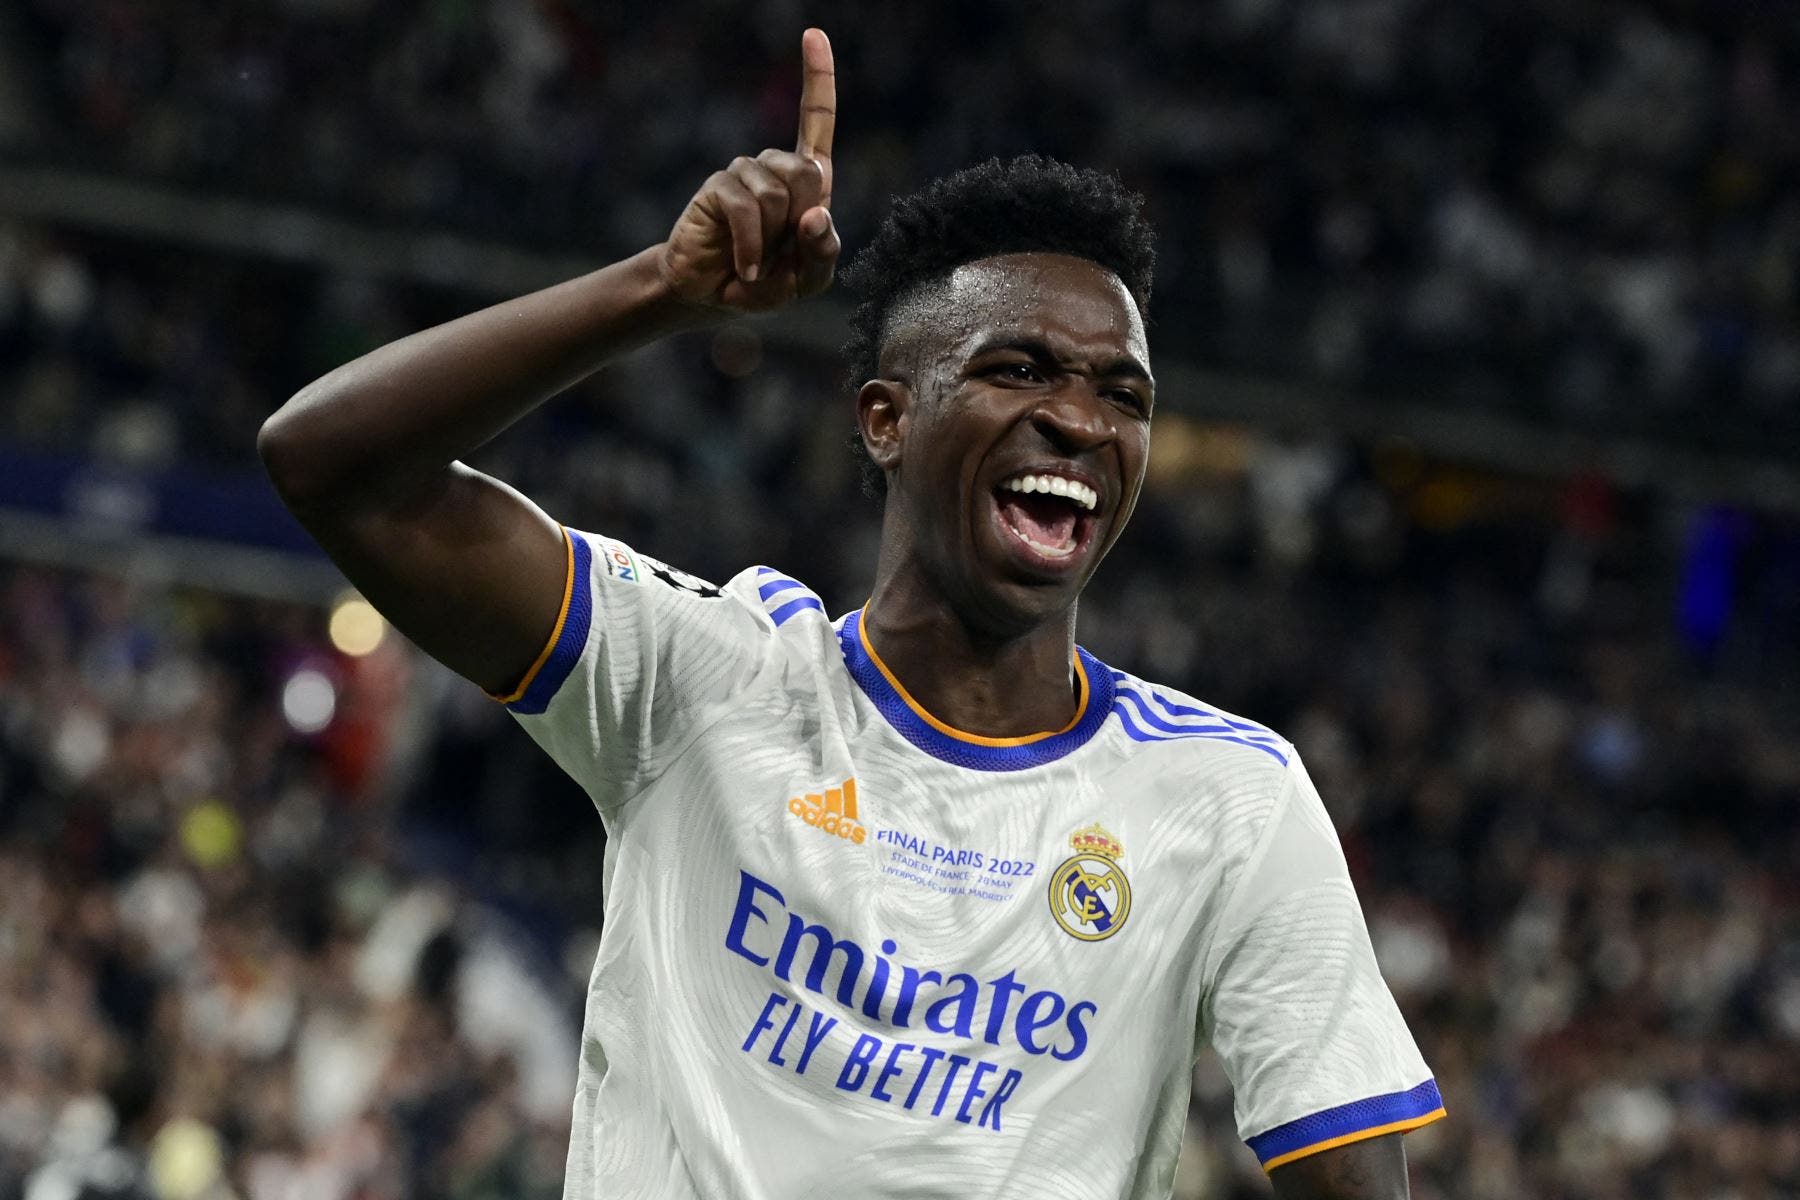 18 forward joins Real Madrid to replace Vinicius Jr loss
	

